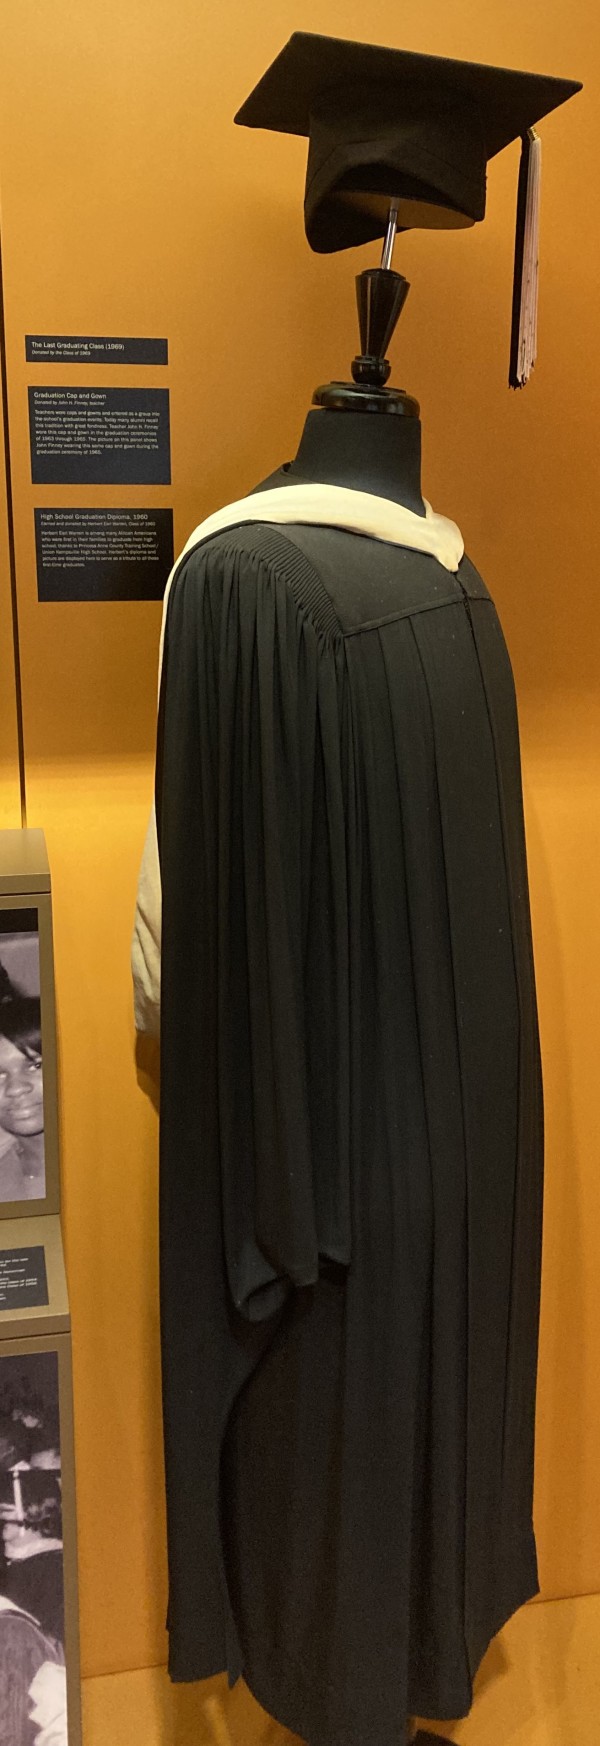 Graduation Gown by Bentley & Simon